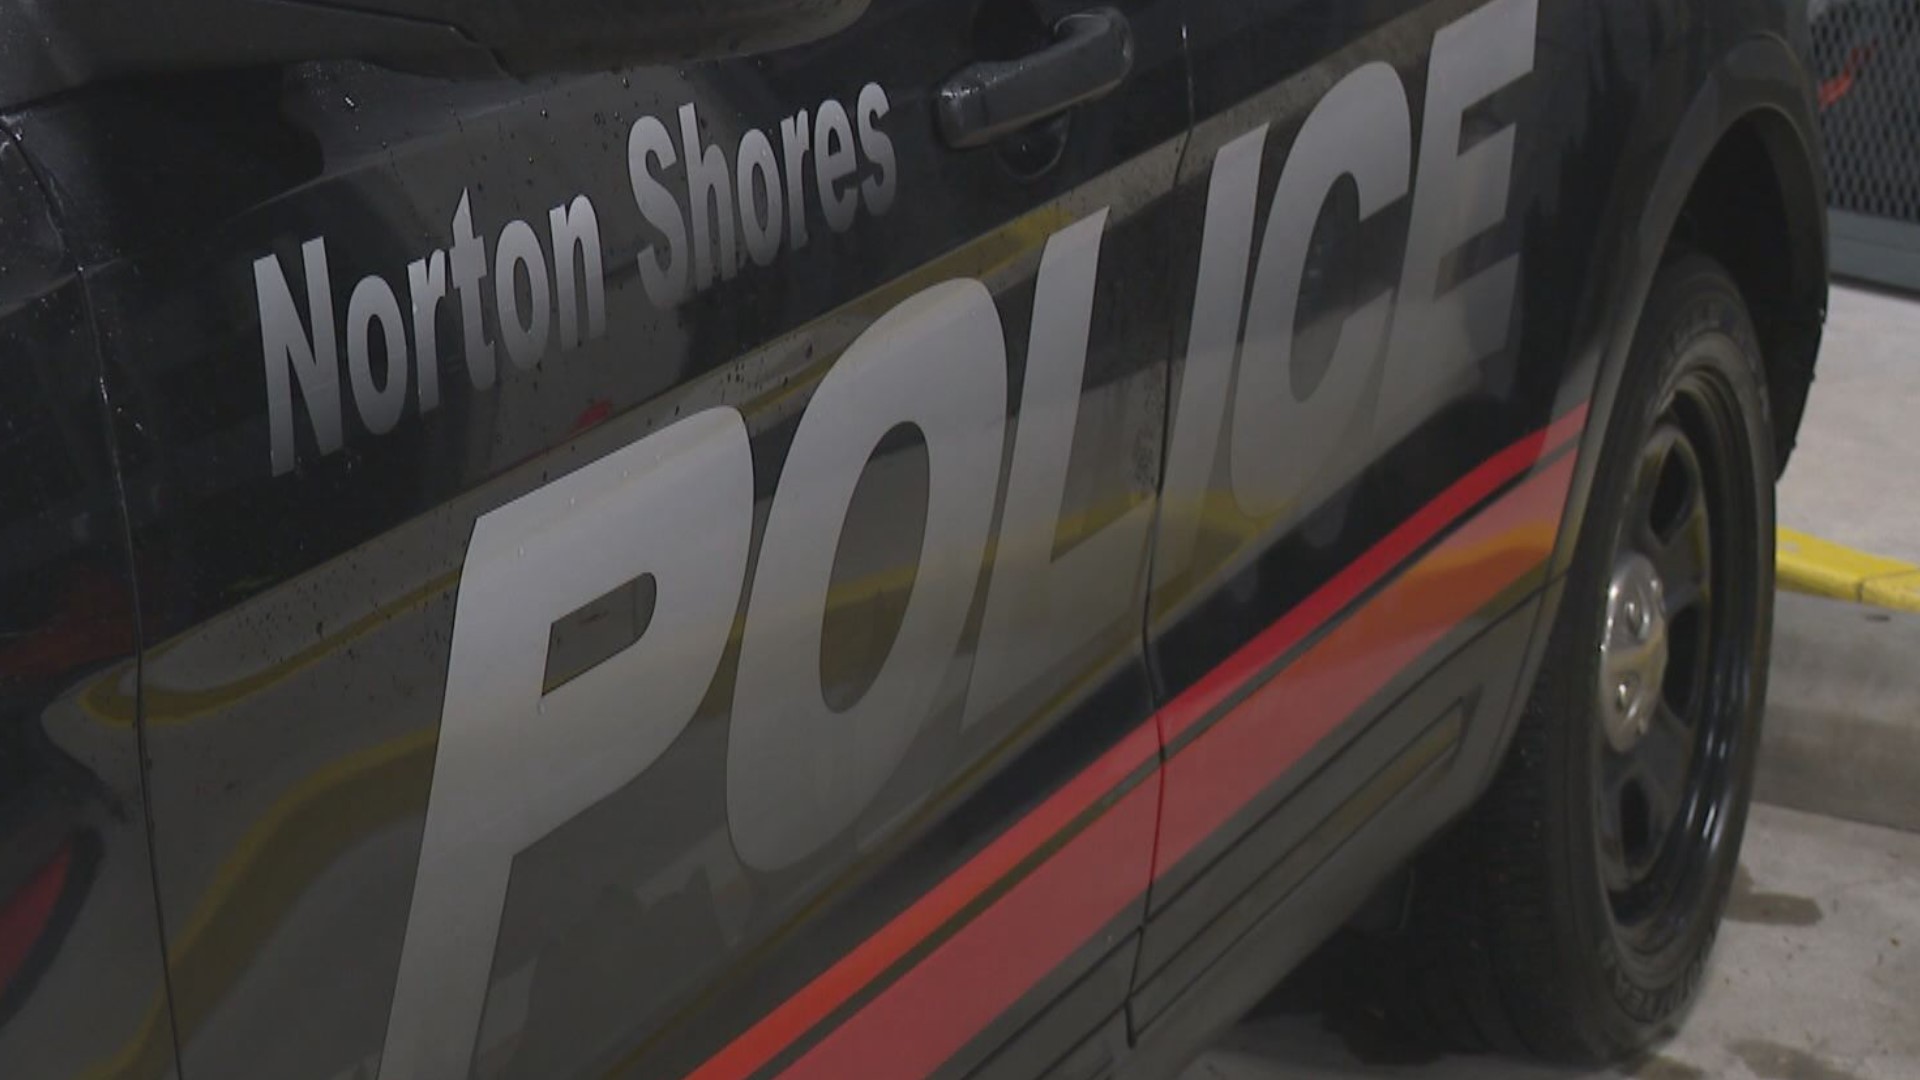 The Norton Shores Police Department is currently searching for a suspect or suspects after one person was shot and killed Thursday afternoon.